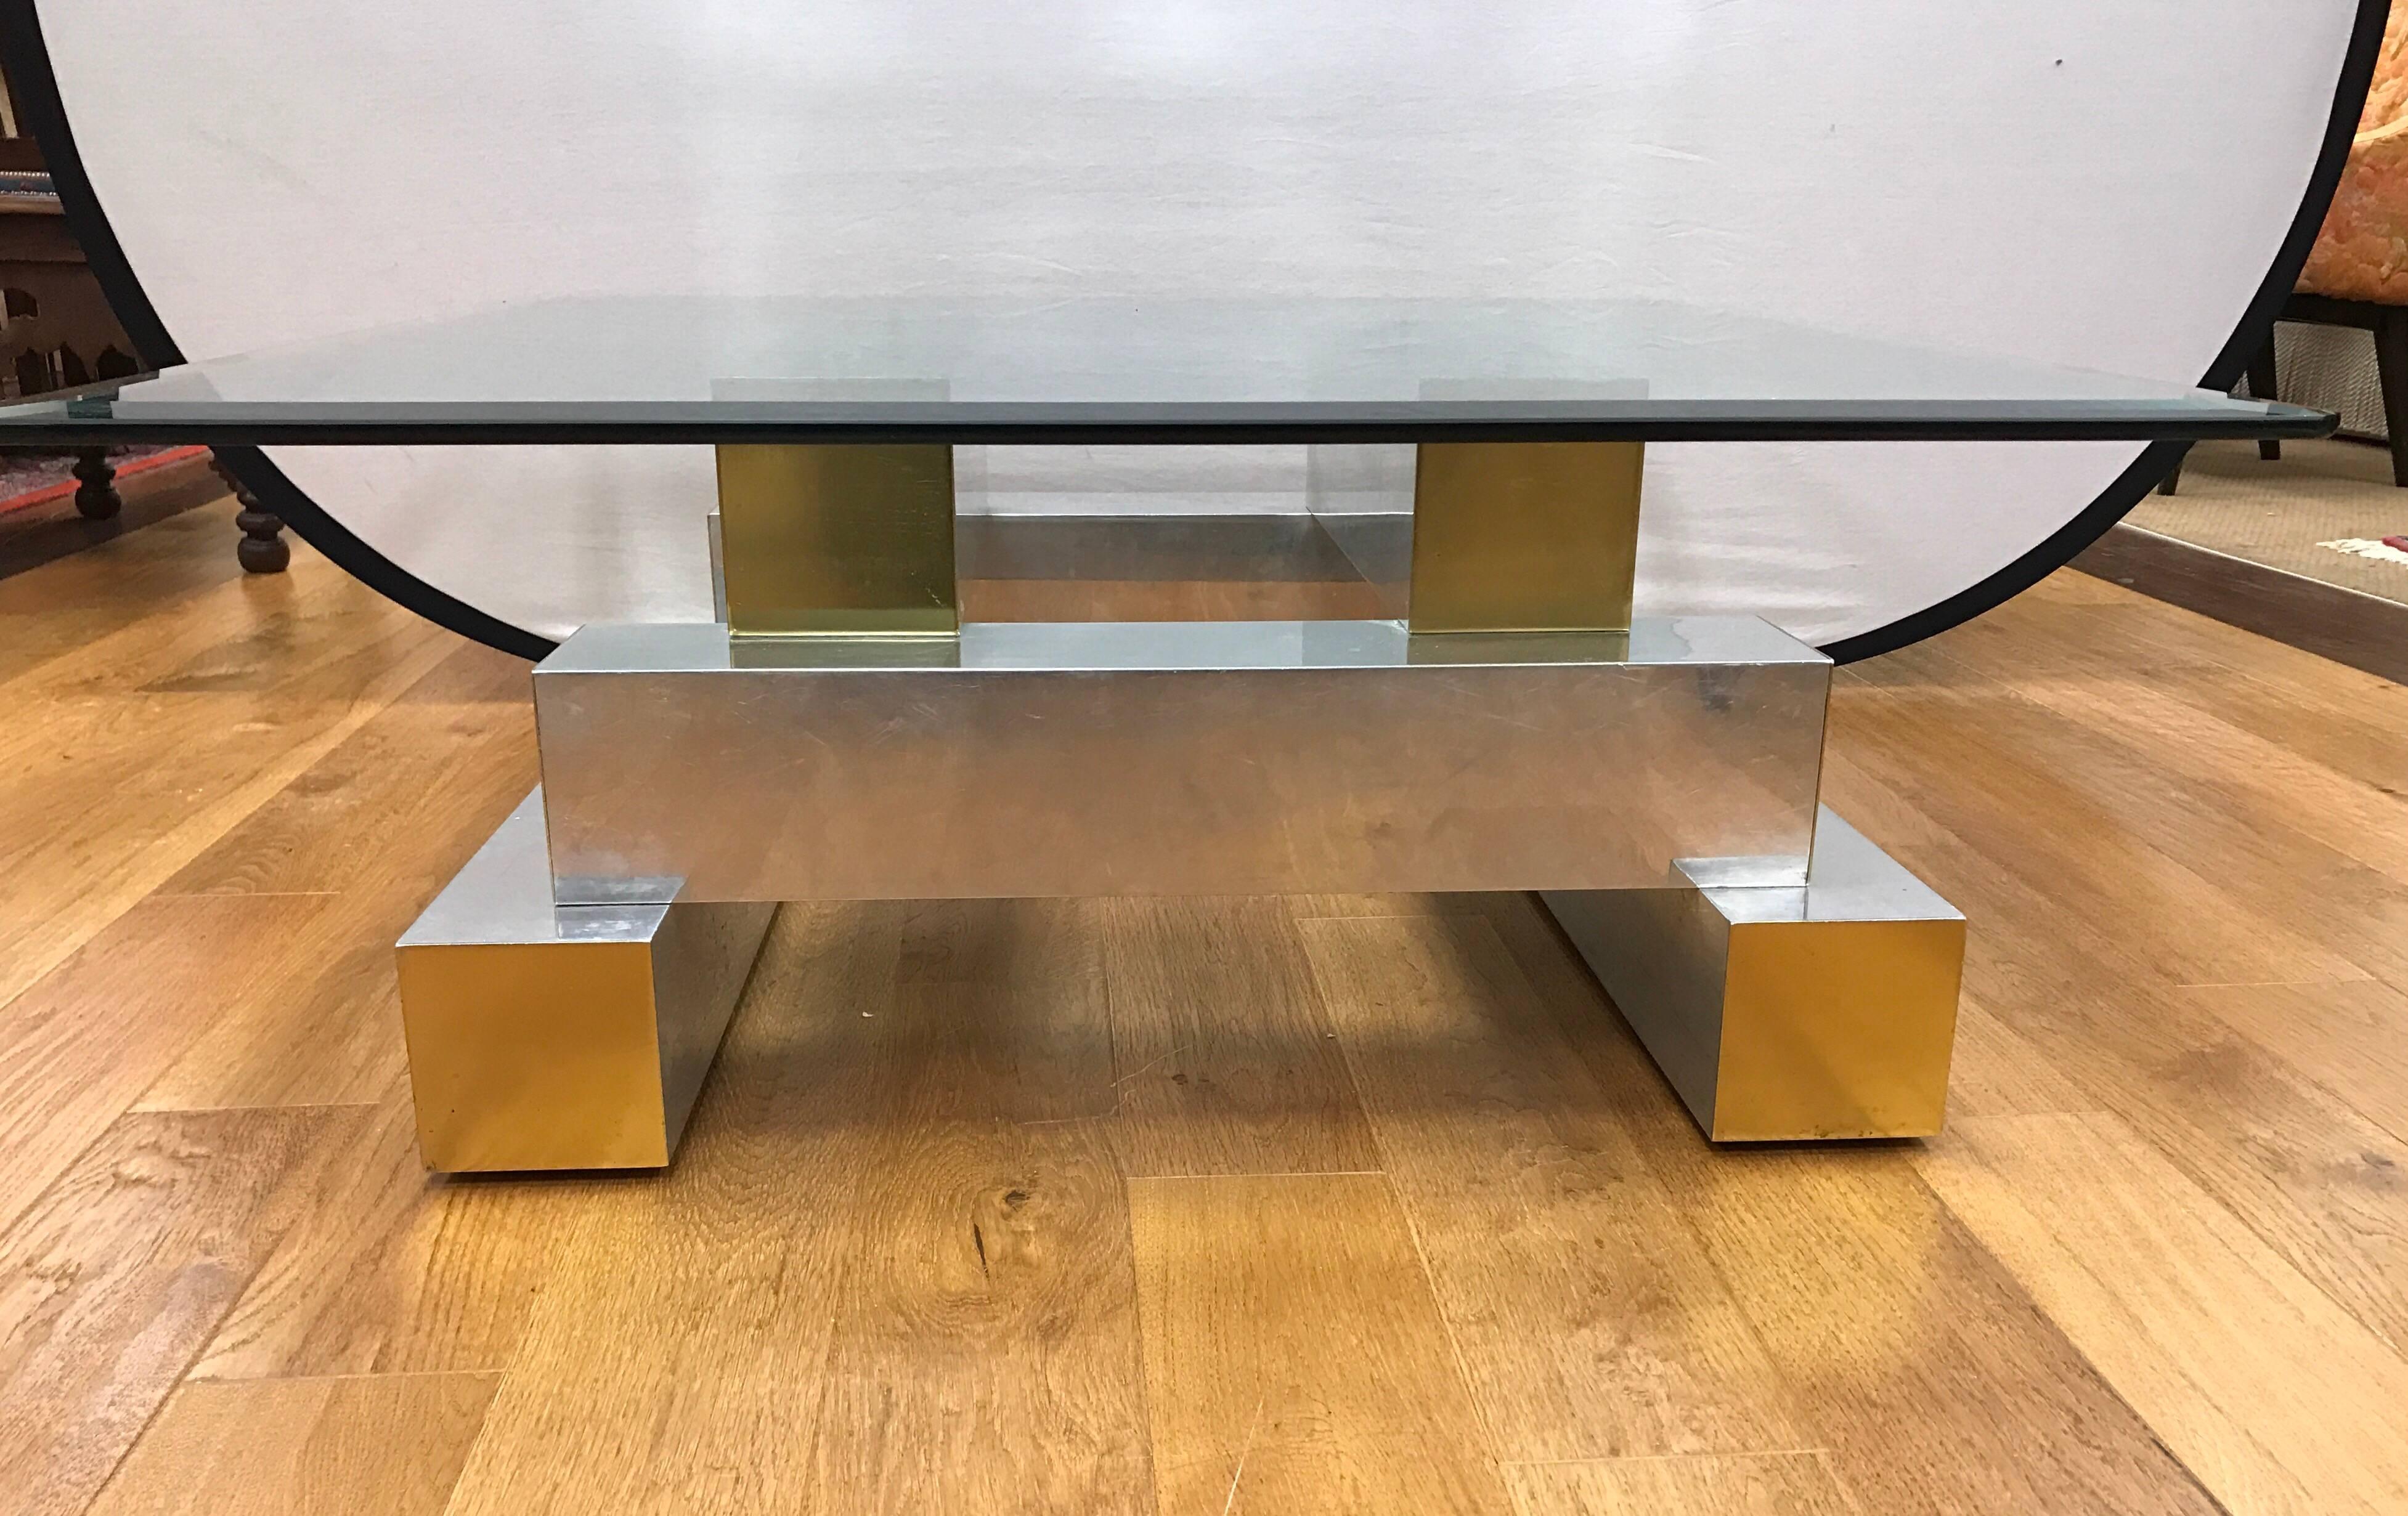 Mid-Century Modern cityscape coffee table by Paul Evans has a square glass top with chrome and brass base.
Measurement of glass on is 36 inches by 36 inches
Measurement of base is 29 inches by 29 inches by 14 inches tall.